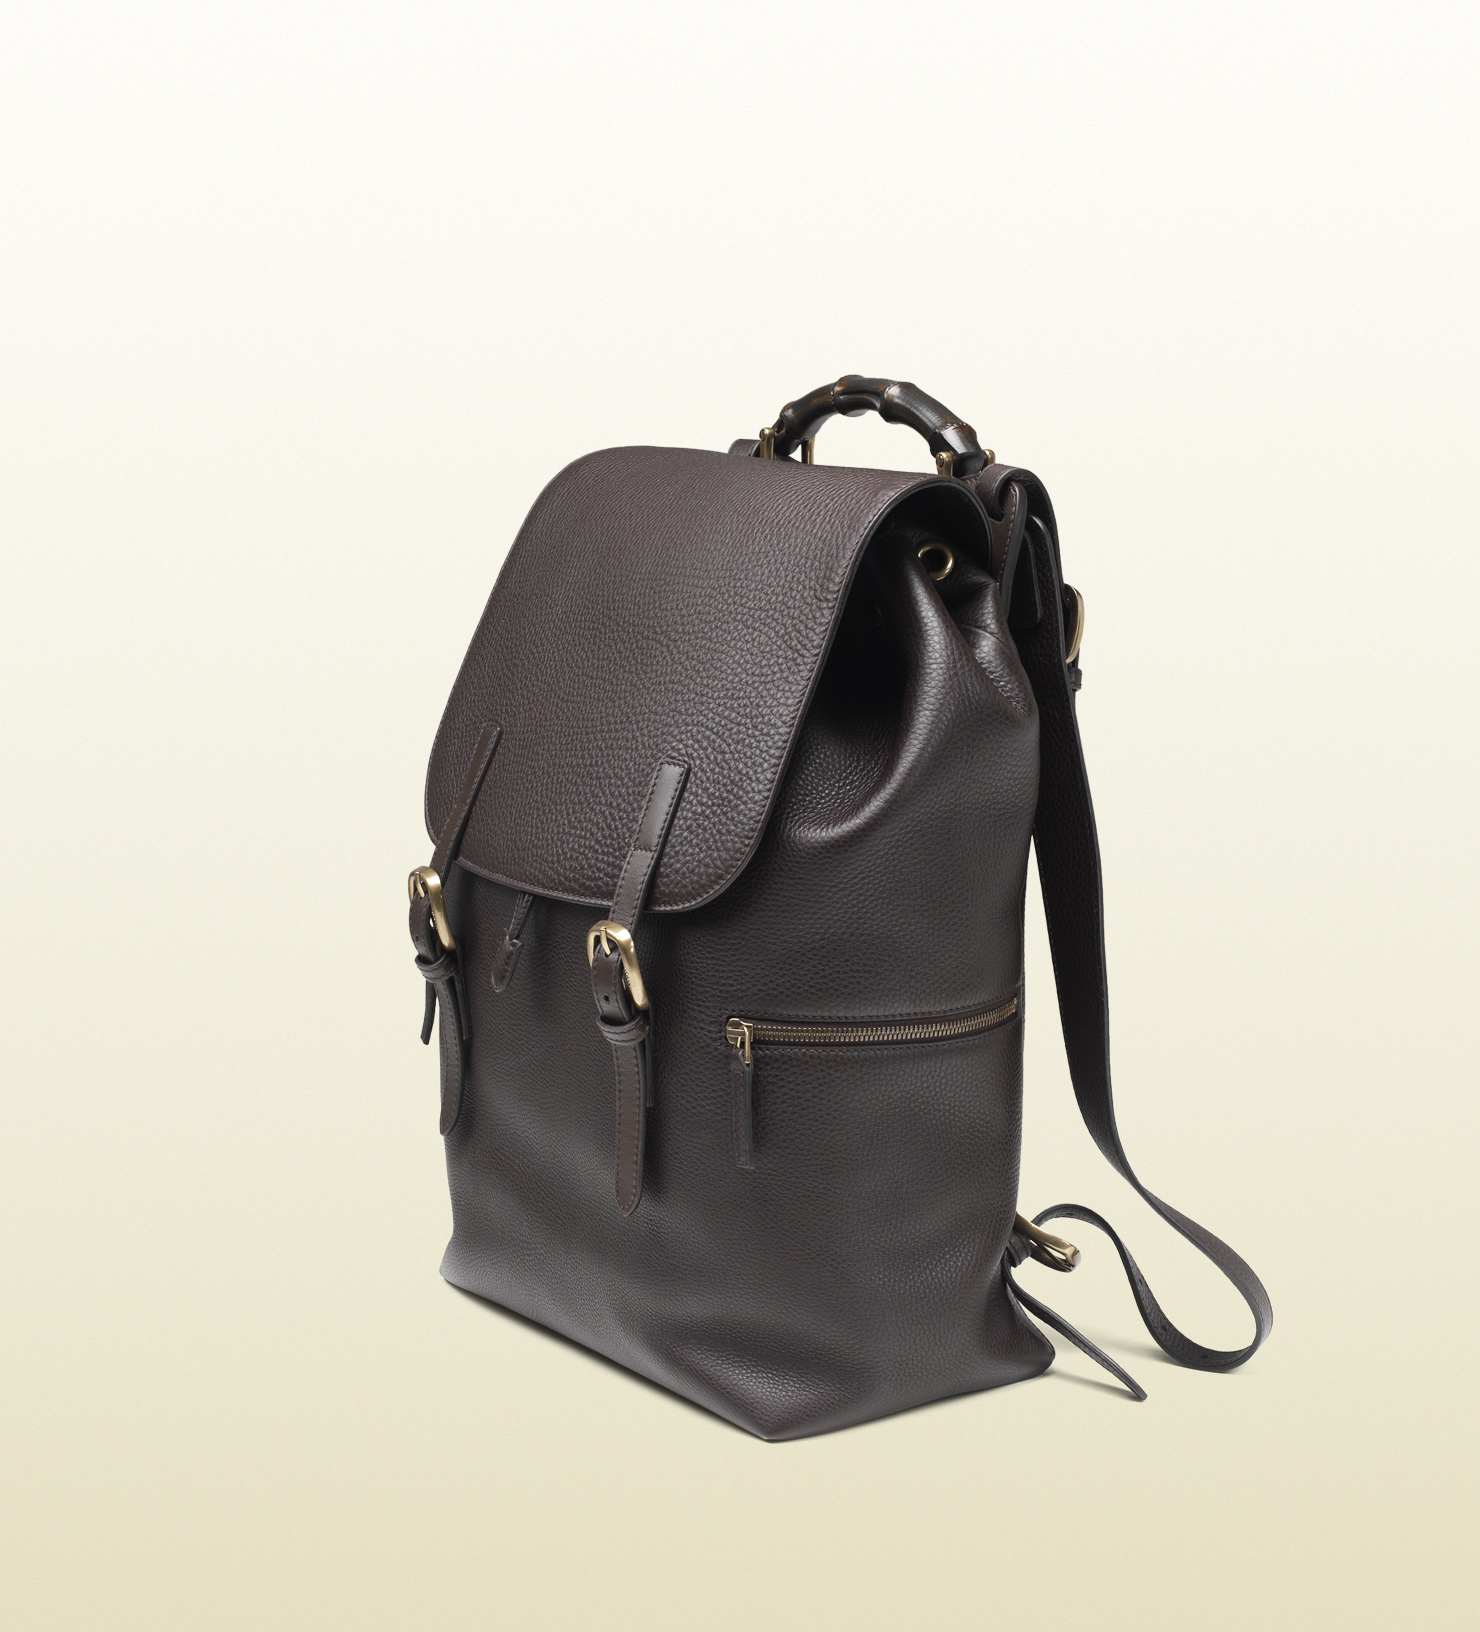 Lyst - Gucci Dark Brown Leather Backpack in Brown for Men